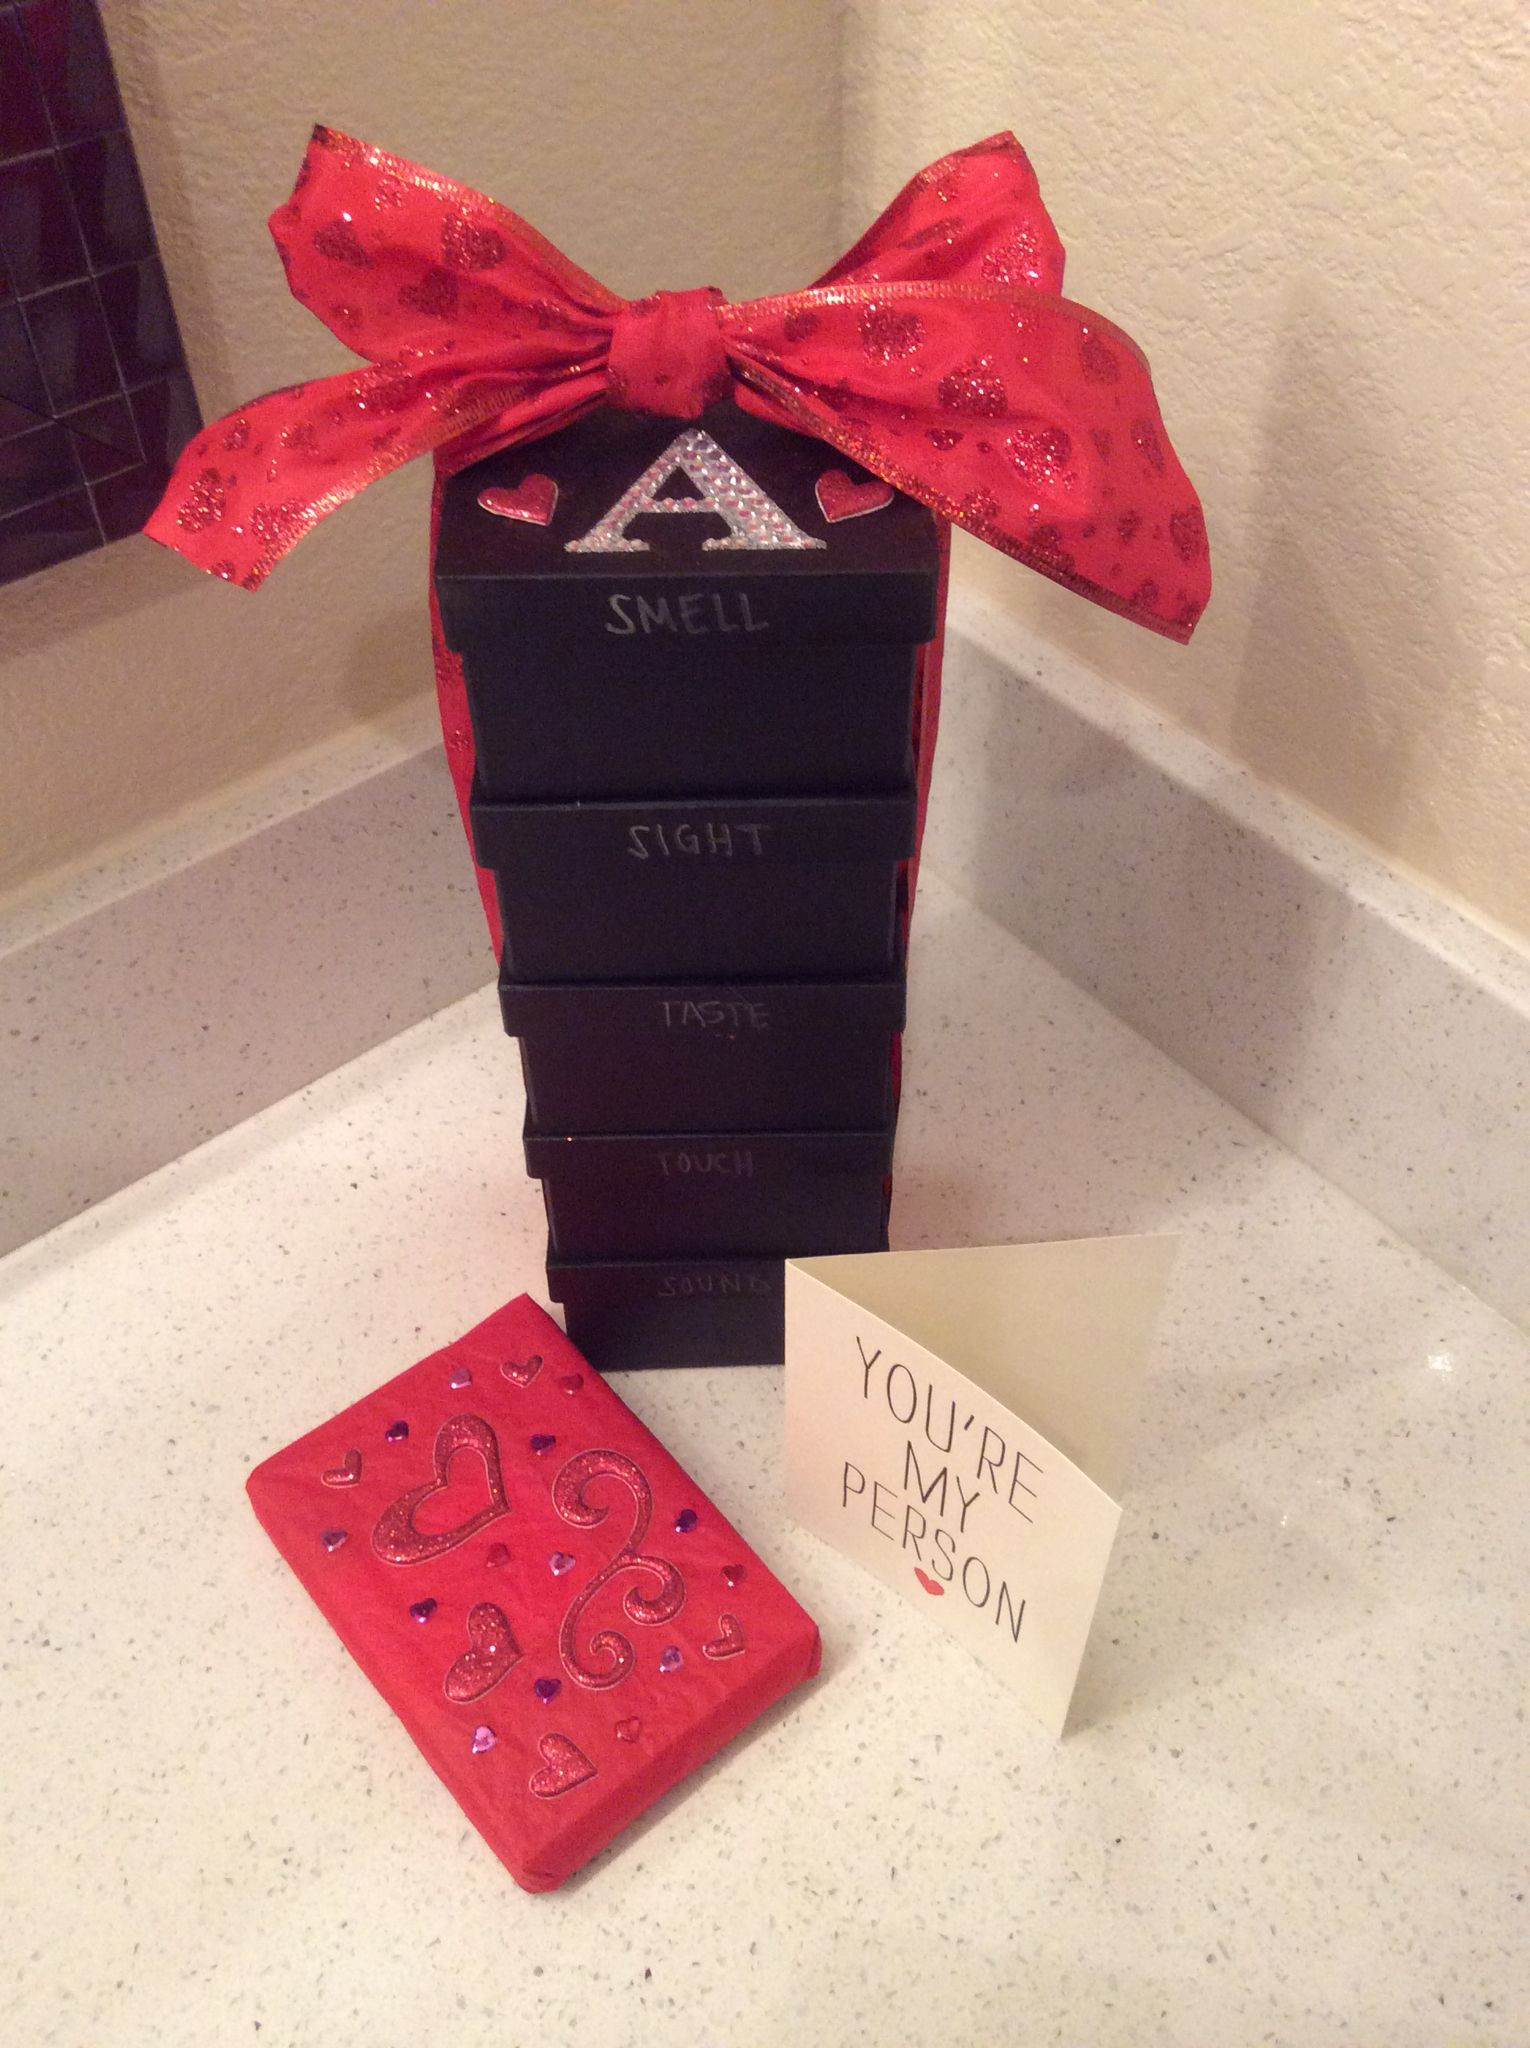 5 Senses Valentine'S Gift For Him Ideas
 My creative valentines t for him a box for each of the